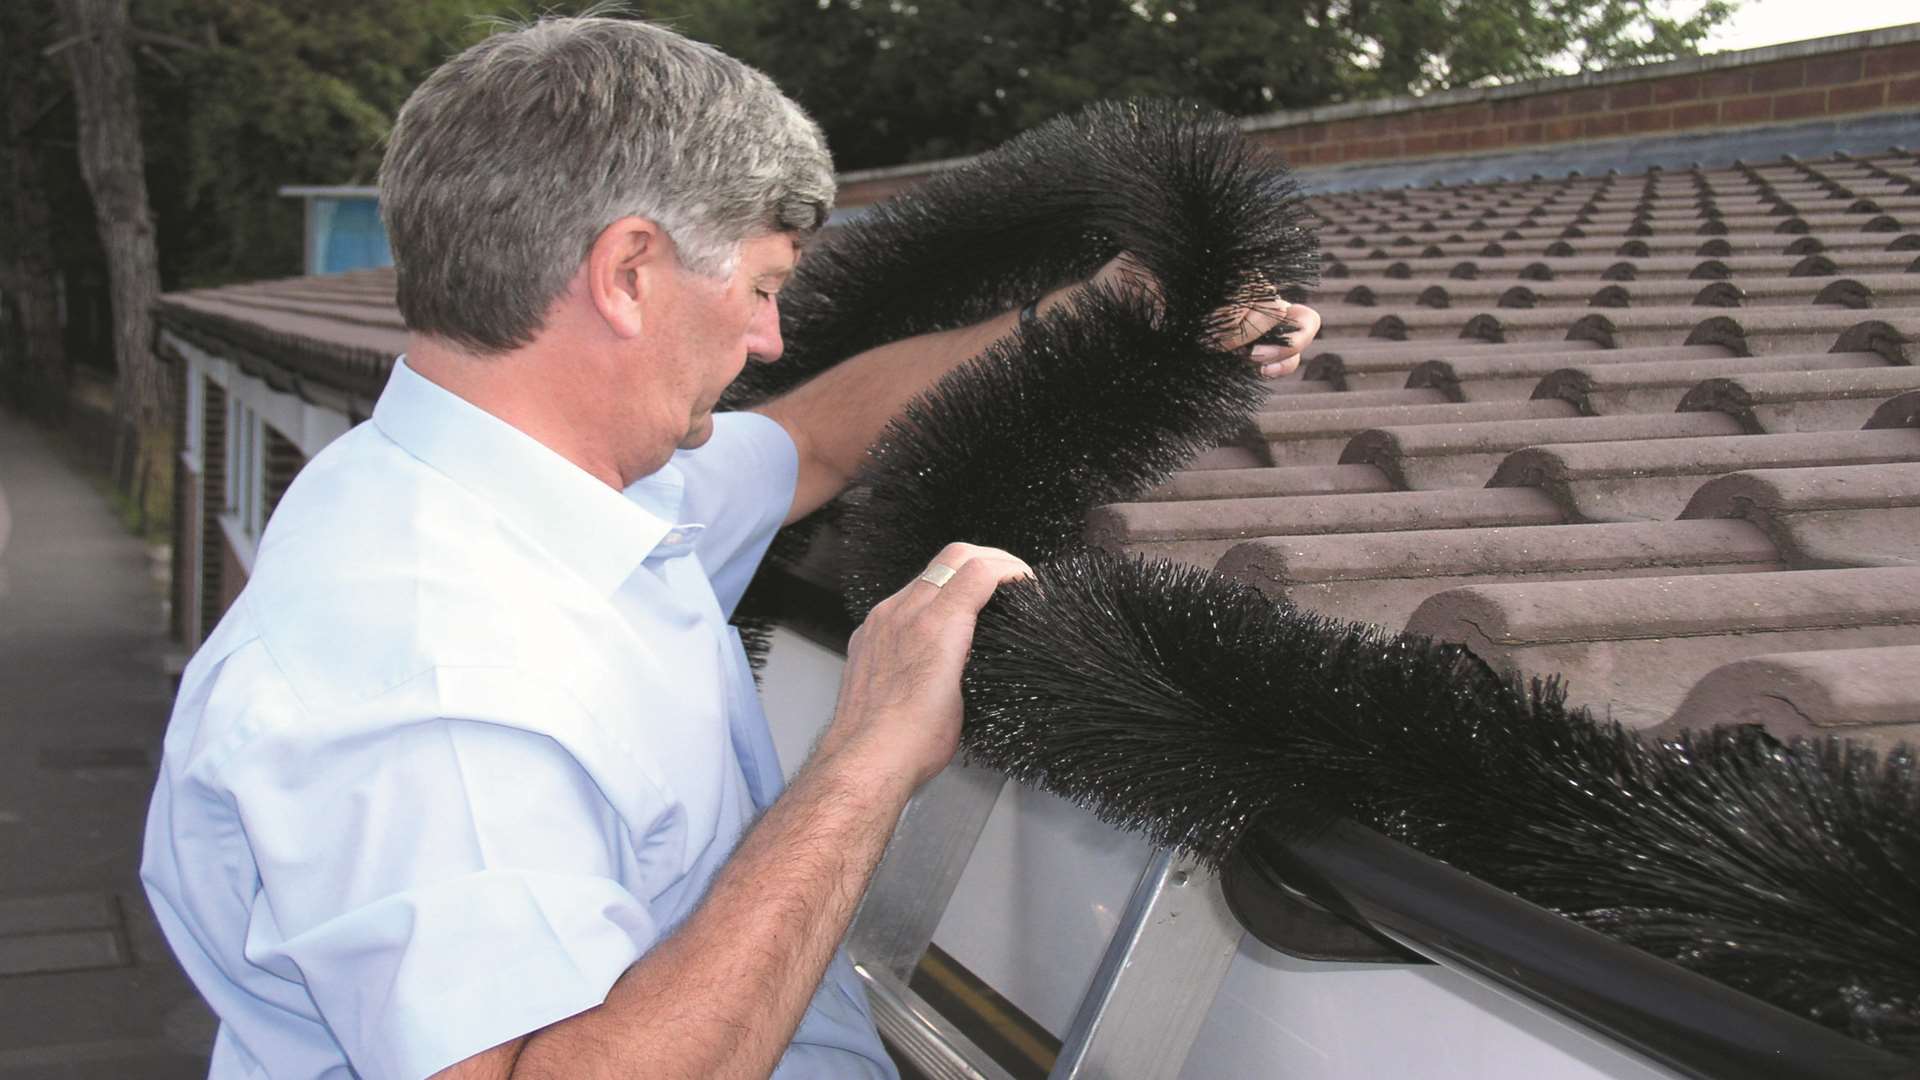 The Hedgehog Gutter Brush can be installed by anyone